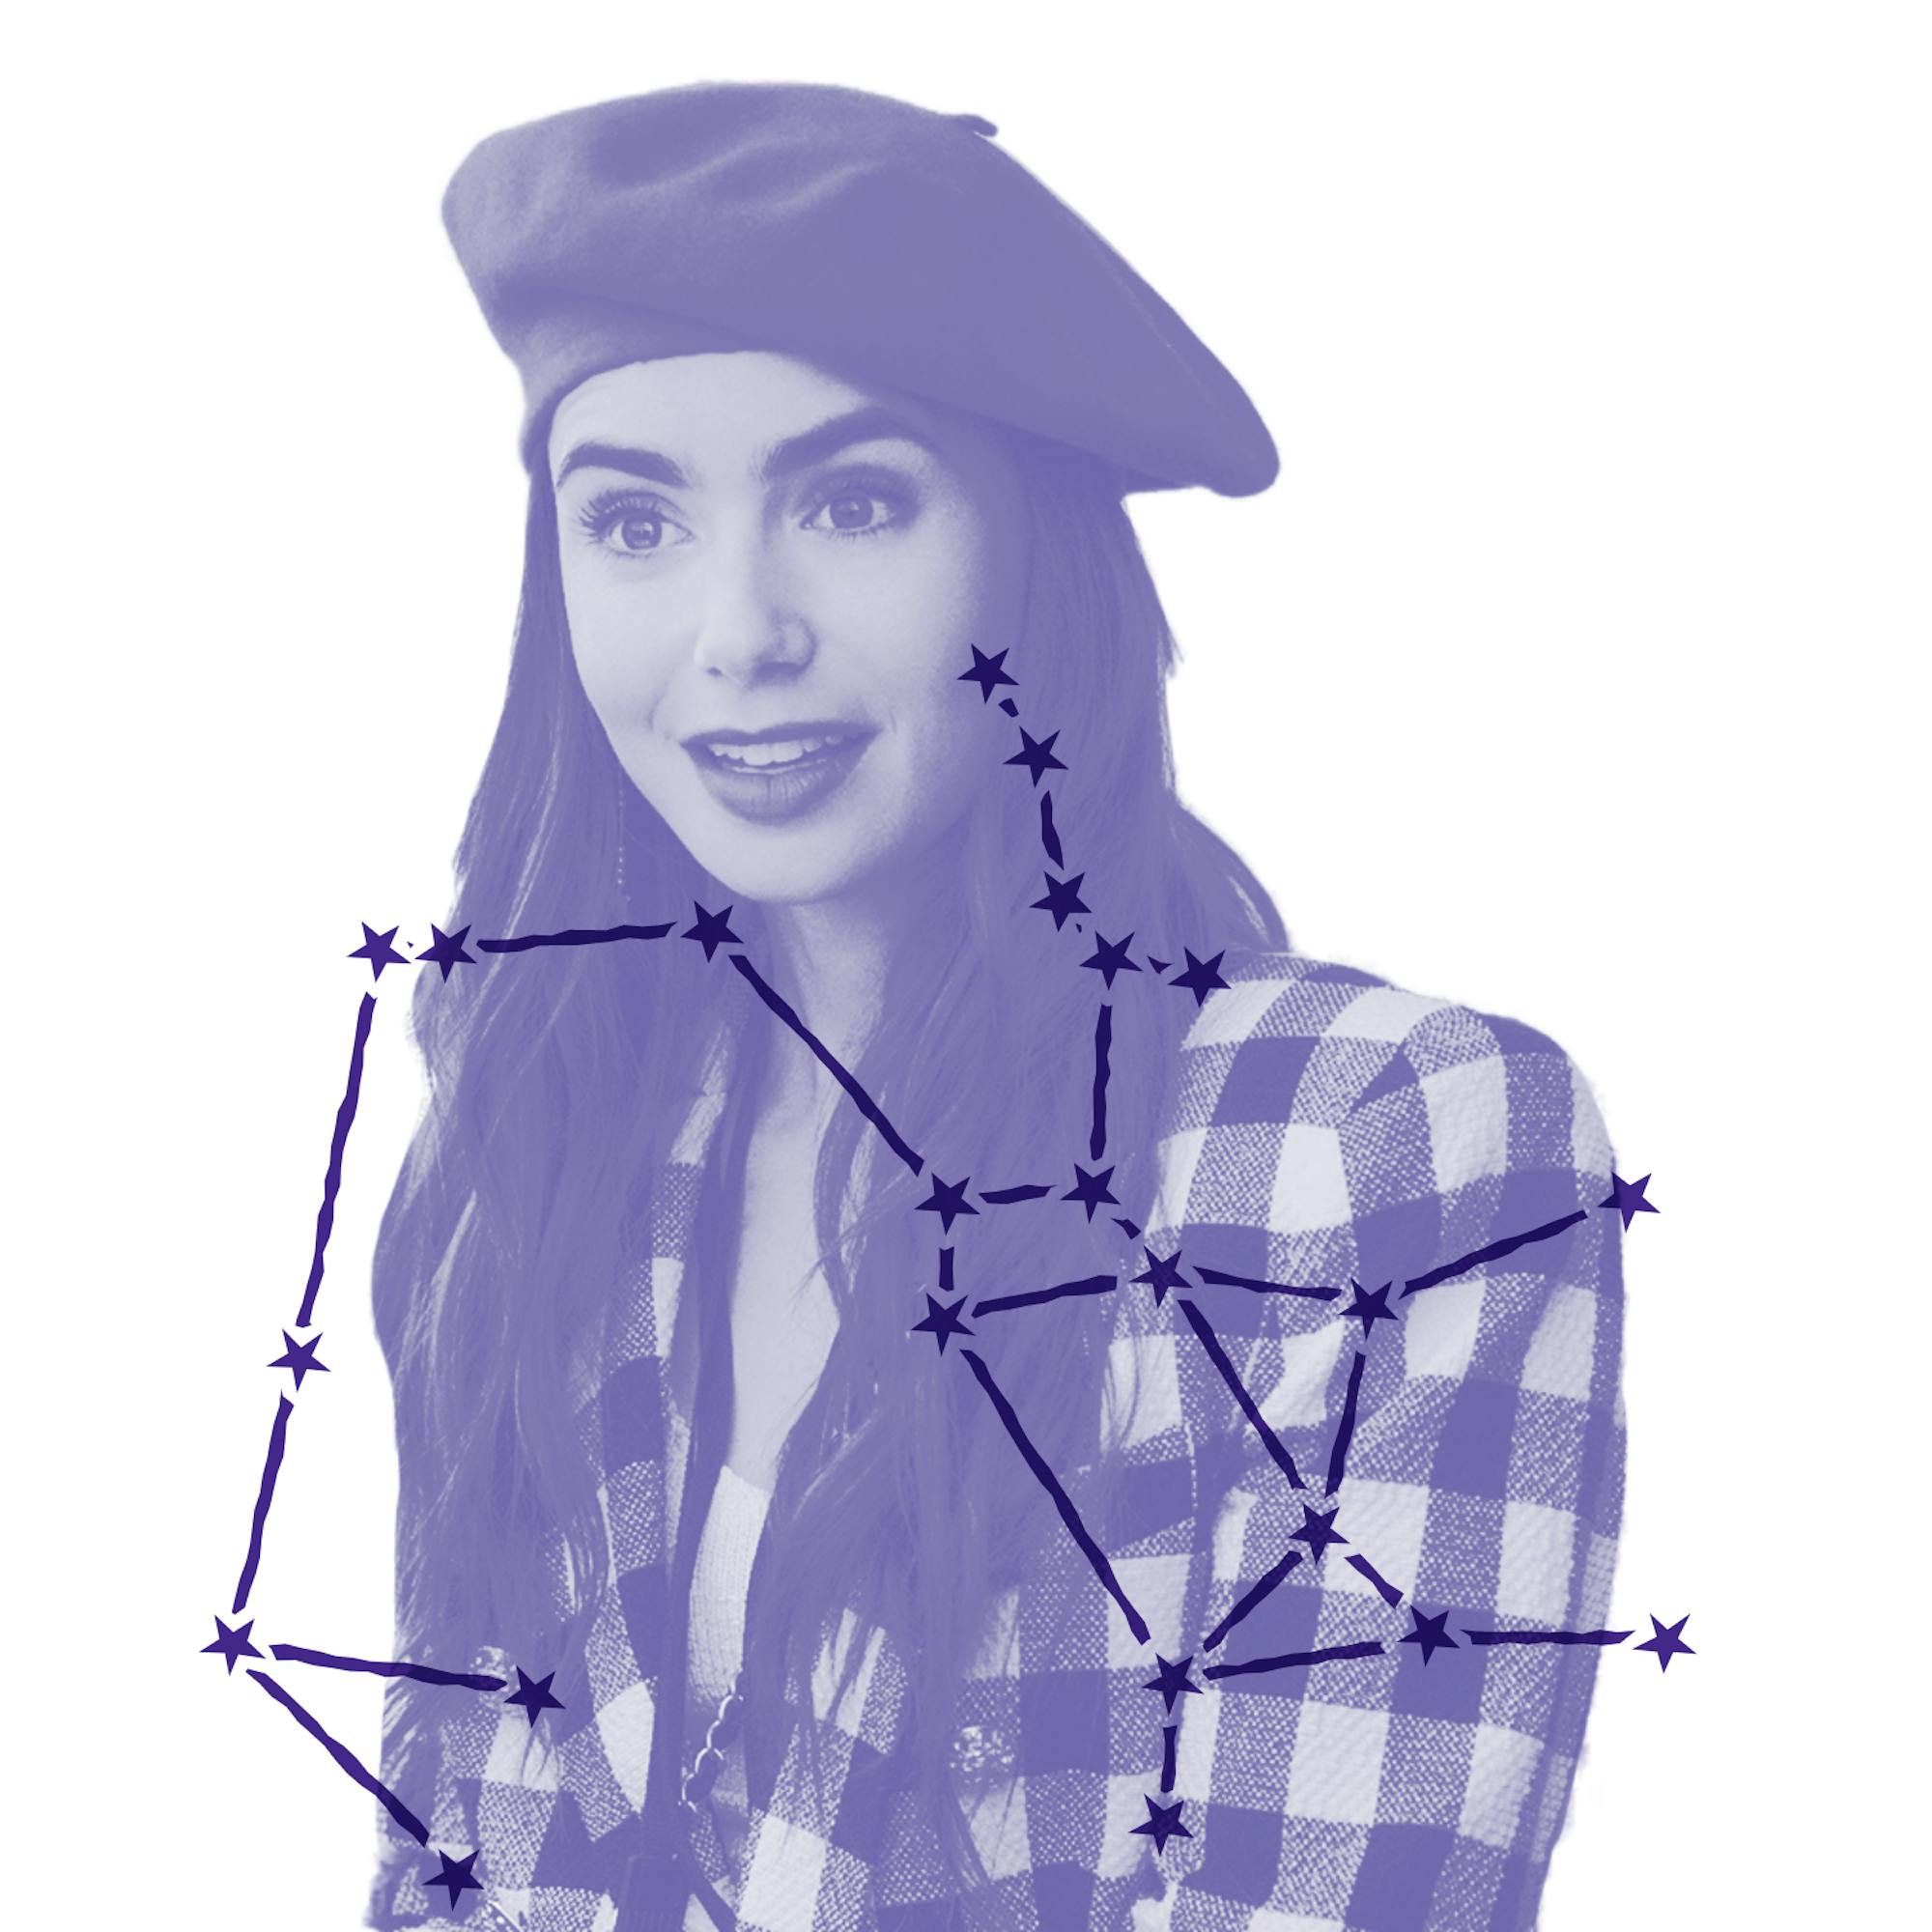 Emily Cooper (played by Lily Collins) is ready to conquer the world in her checkered coat and beret in this still from Emily in Paris. Over the image is an illustration of Emily’s zodiac constellation.